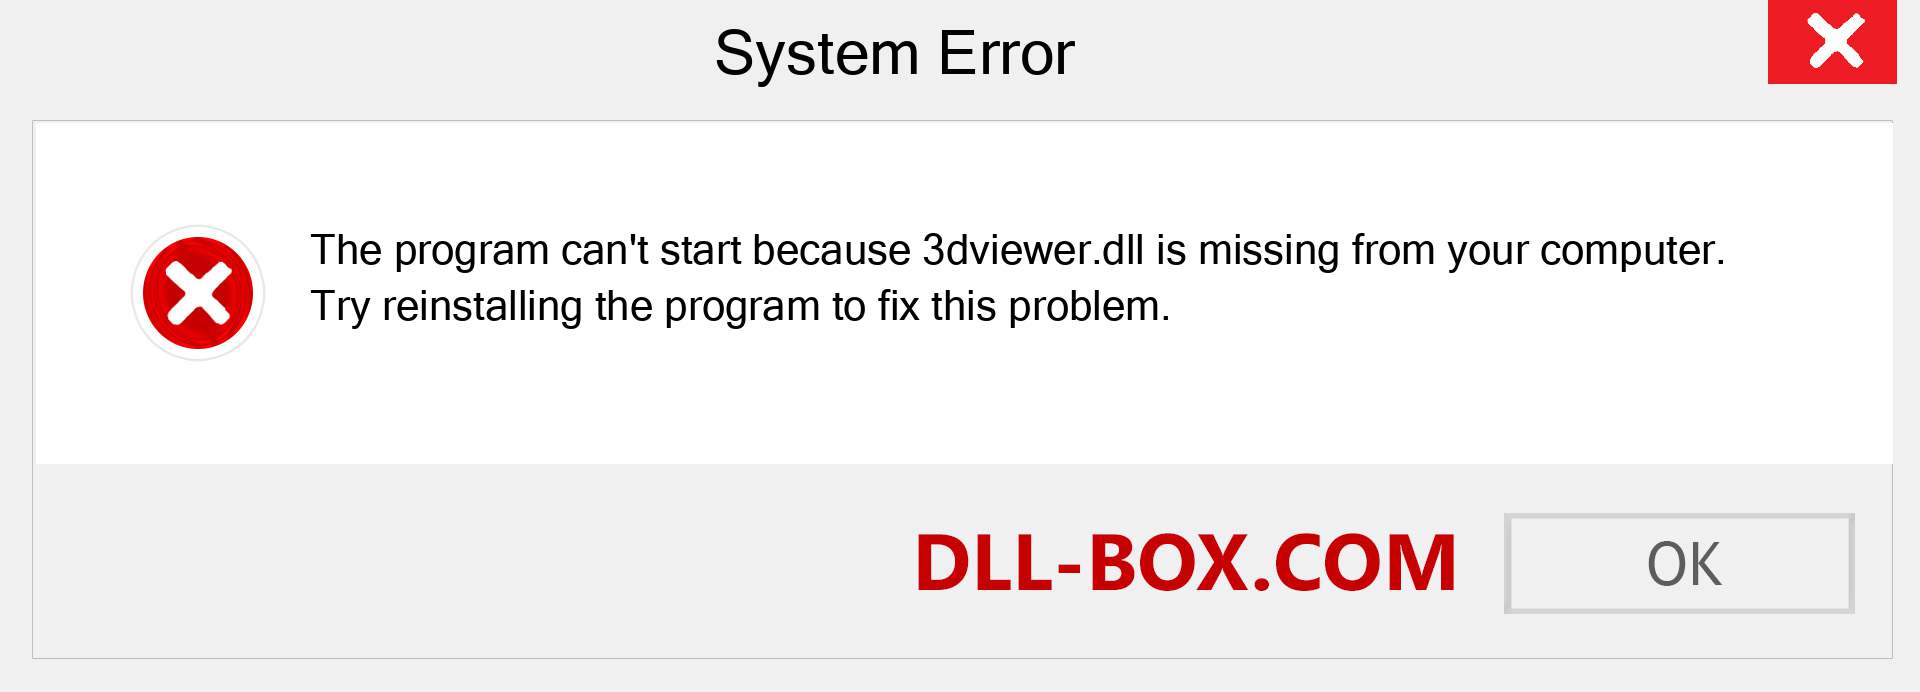  3dviewer.dll file is missing?. Download for Windows 7, 8, 10 - Fix  3dviewer dll Missing Error on Windows, photos, images